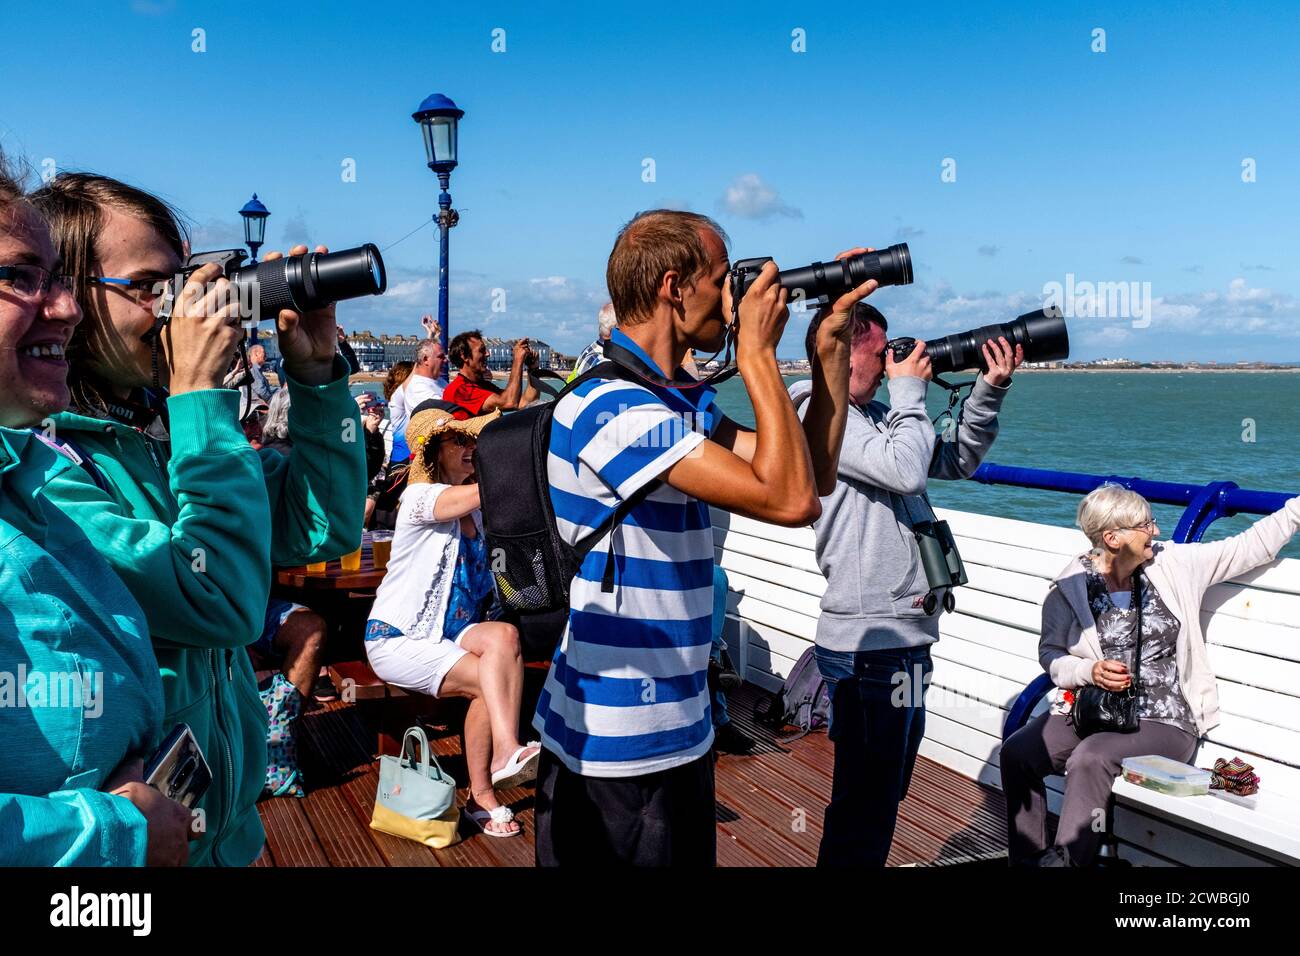 Photographers Take Photos Of An Aircraft Display During The Eastbourne Airshow, Eastbourne, East Sussex, UK Stock Photo